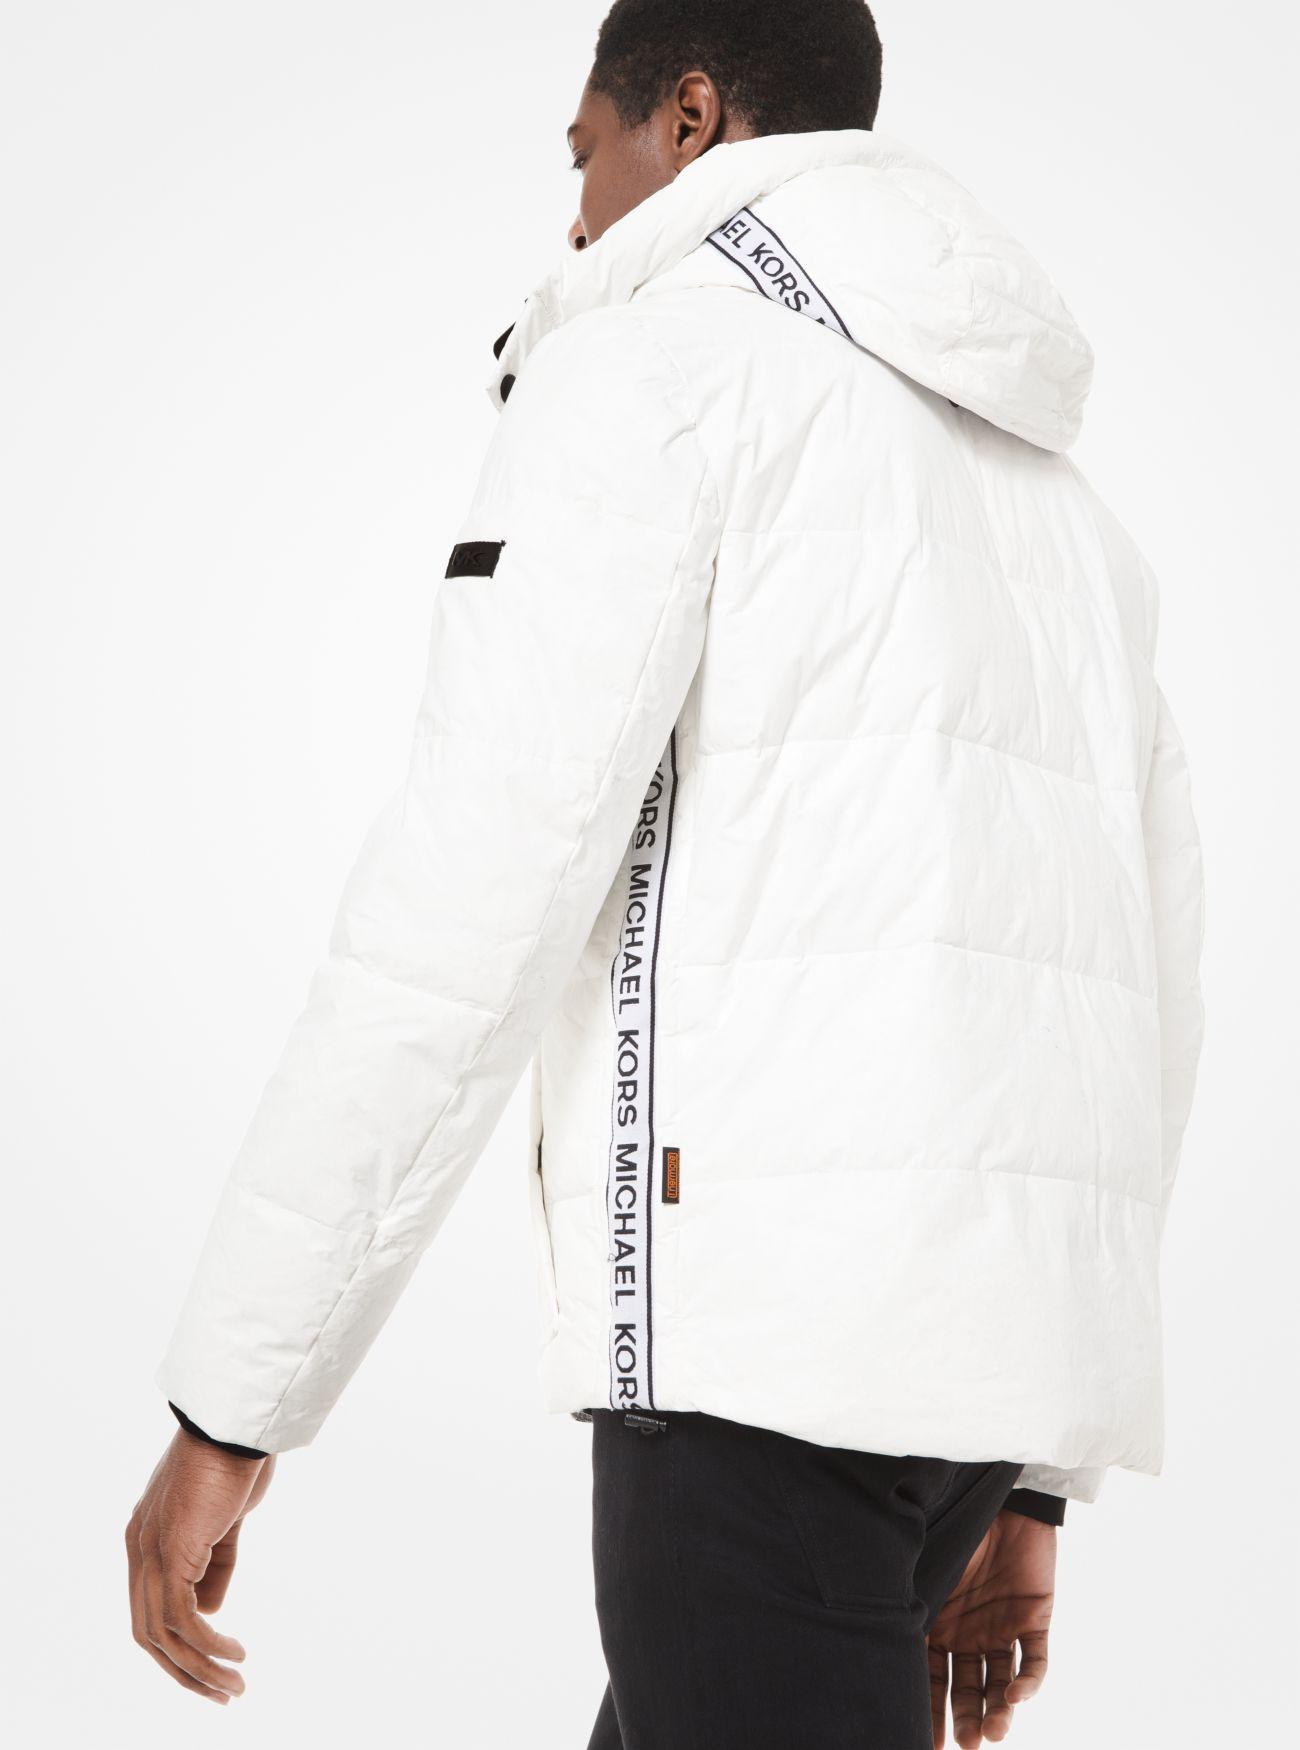 Michael Kors White Jacket Great Discounts, 64% OFF | deliciousgreek.ca